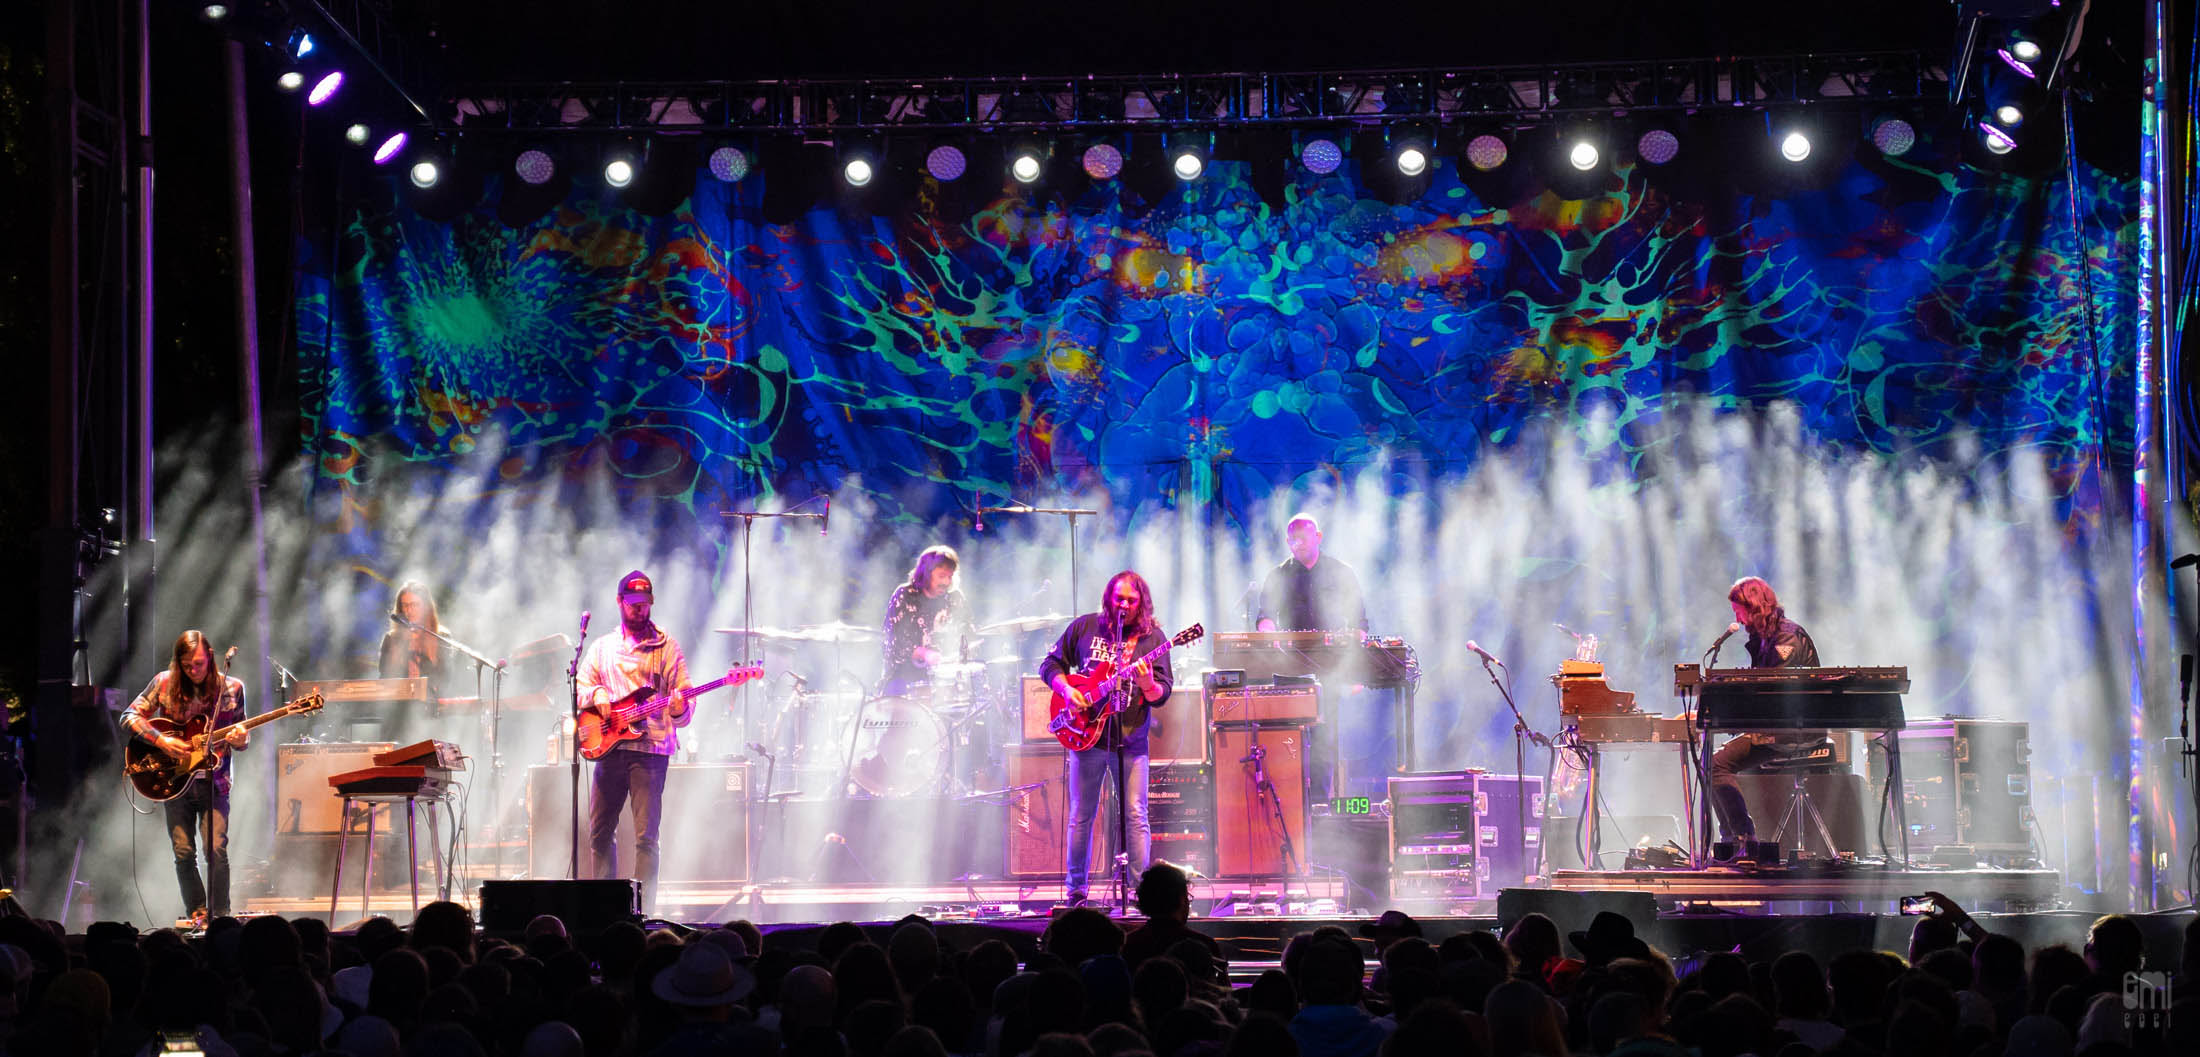 20211112 The War on Drugs with Mad Alchemy Liquid Light Show at Desert Daze 2021, photo by emi